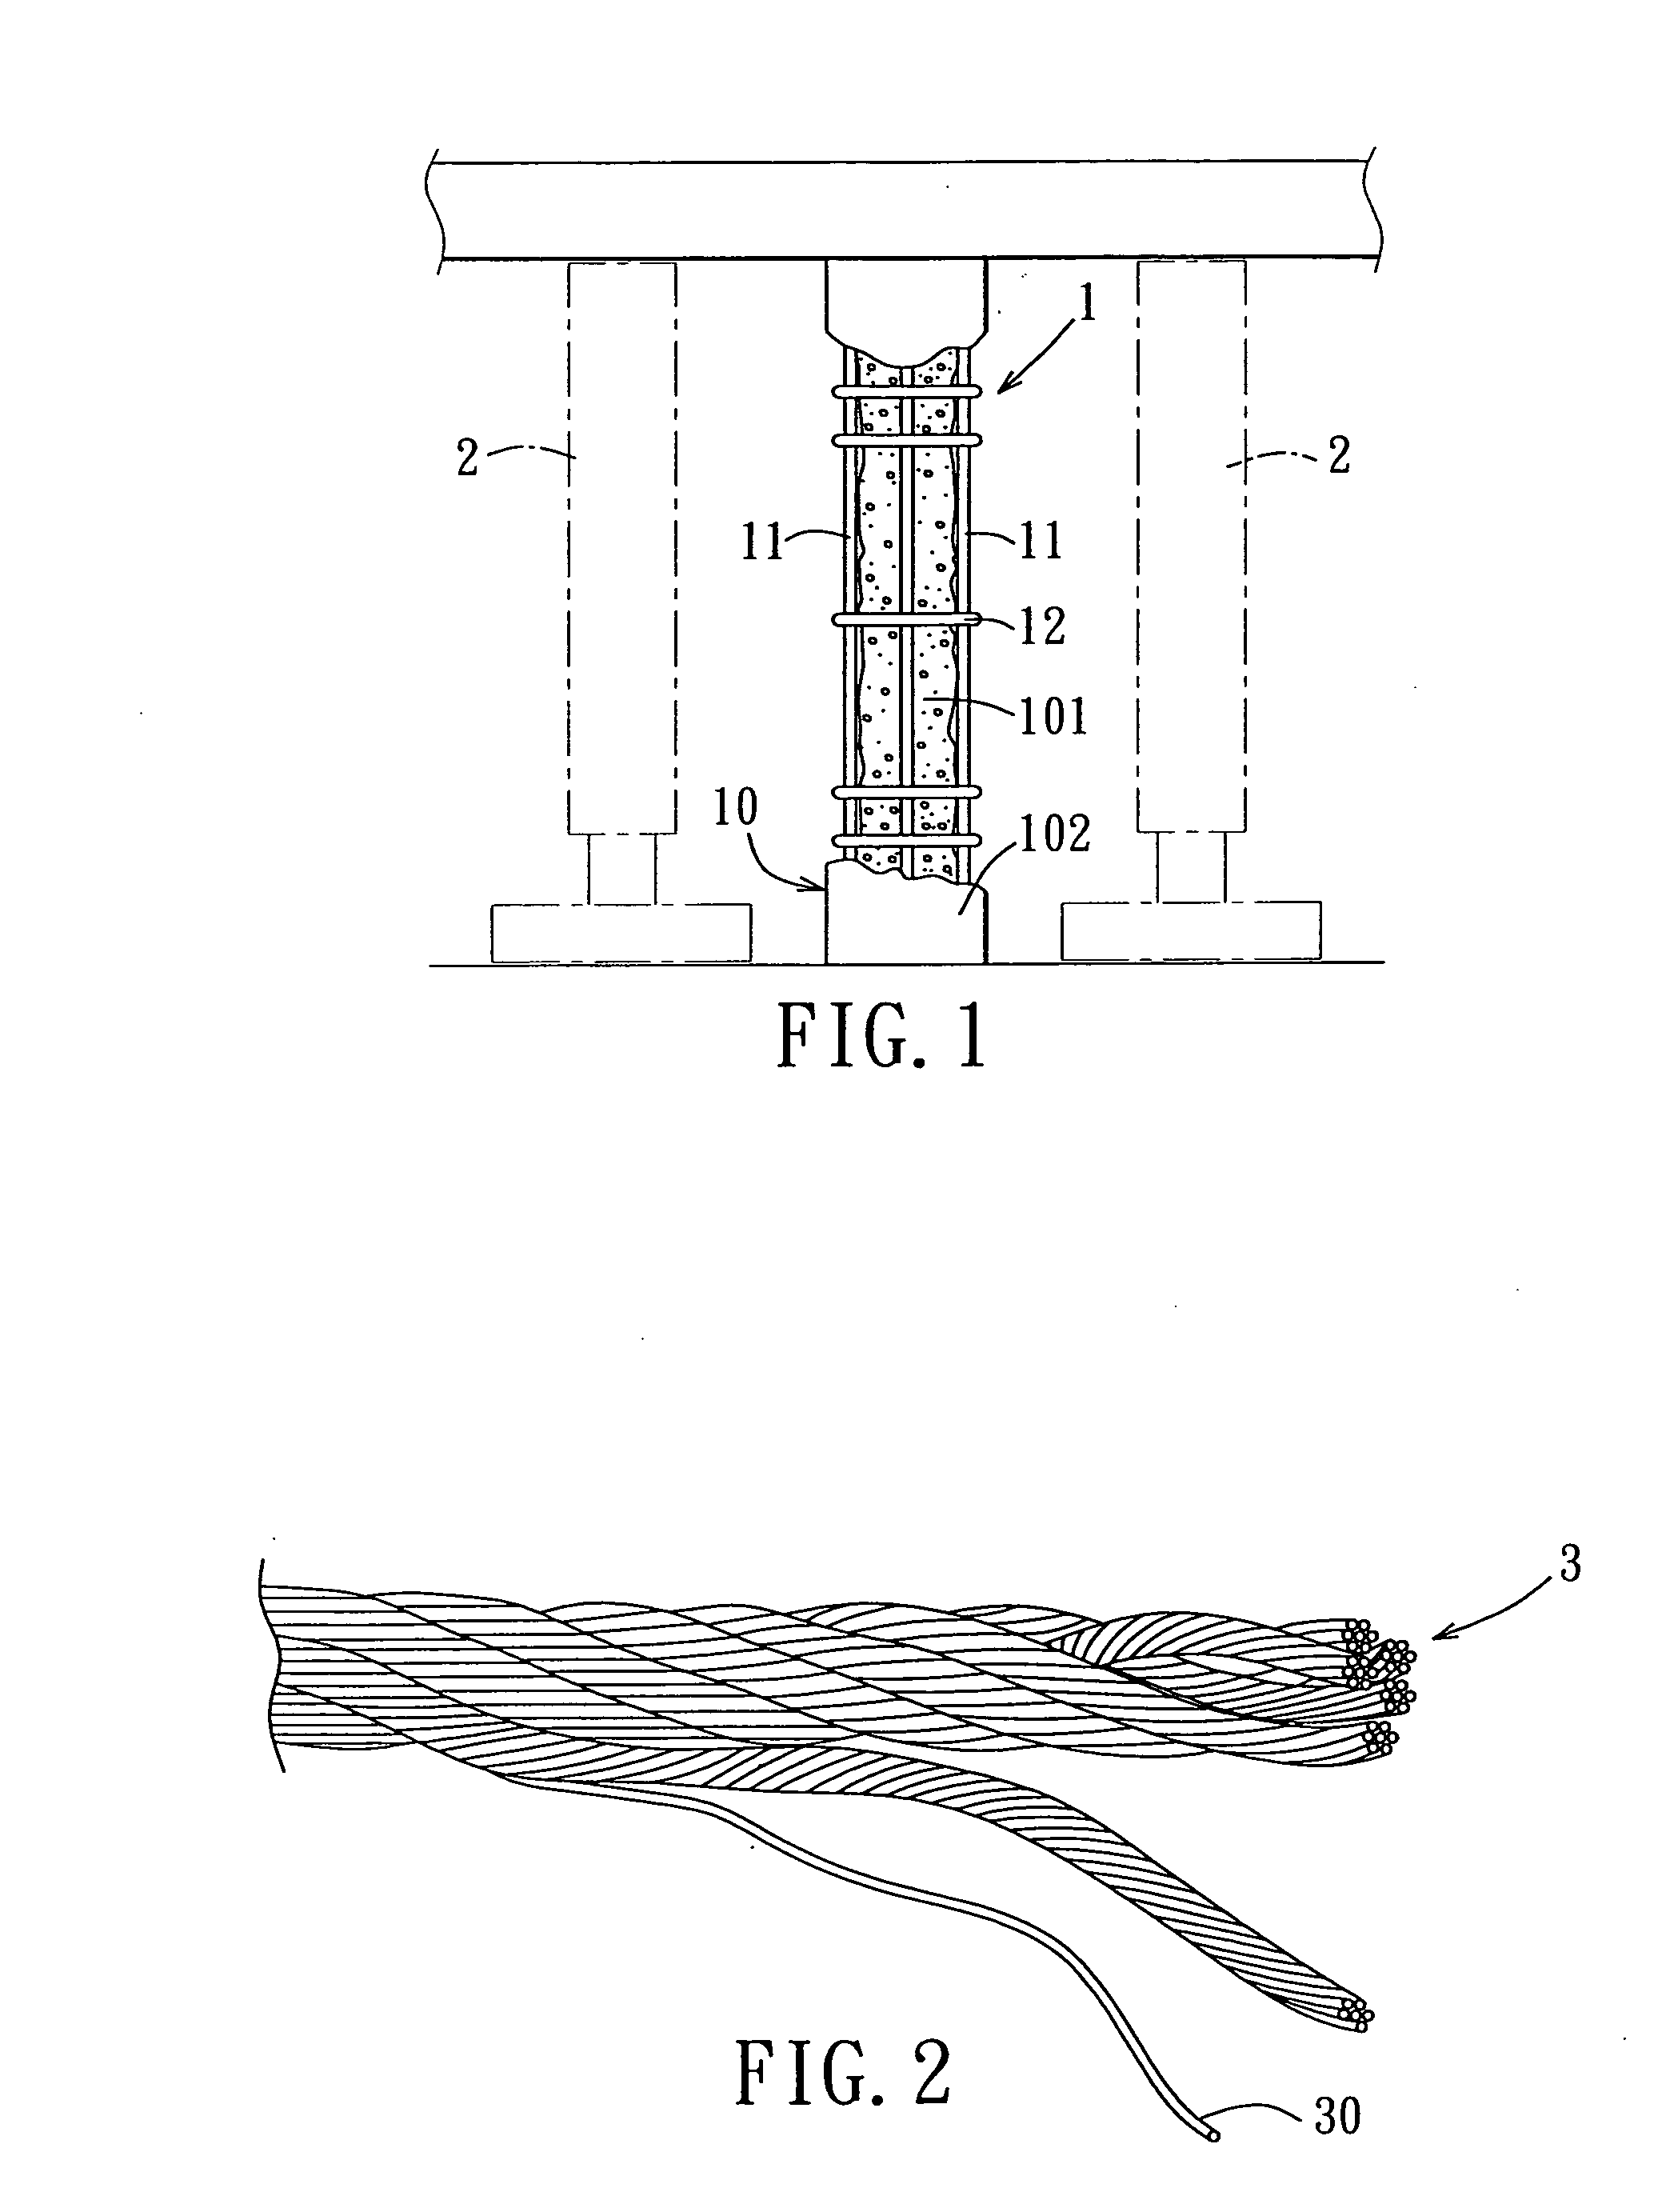 Method for strengthening or repairing an existing reinforced concrete structural element